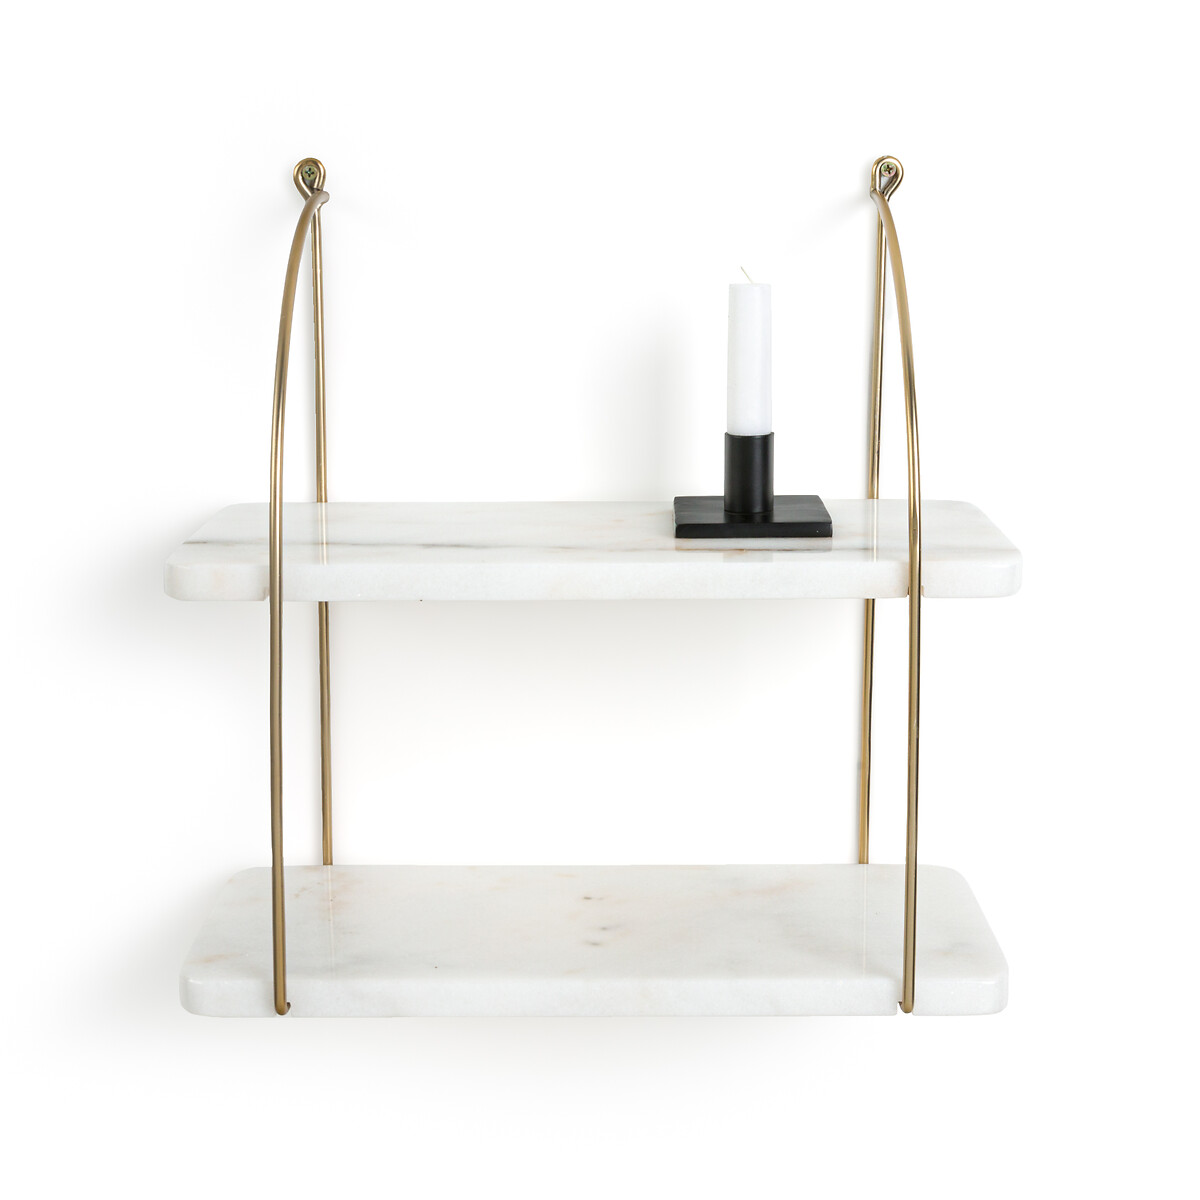 Fitia 40cm Marble and Brass Wall Shelf